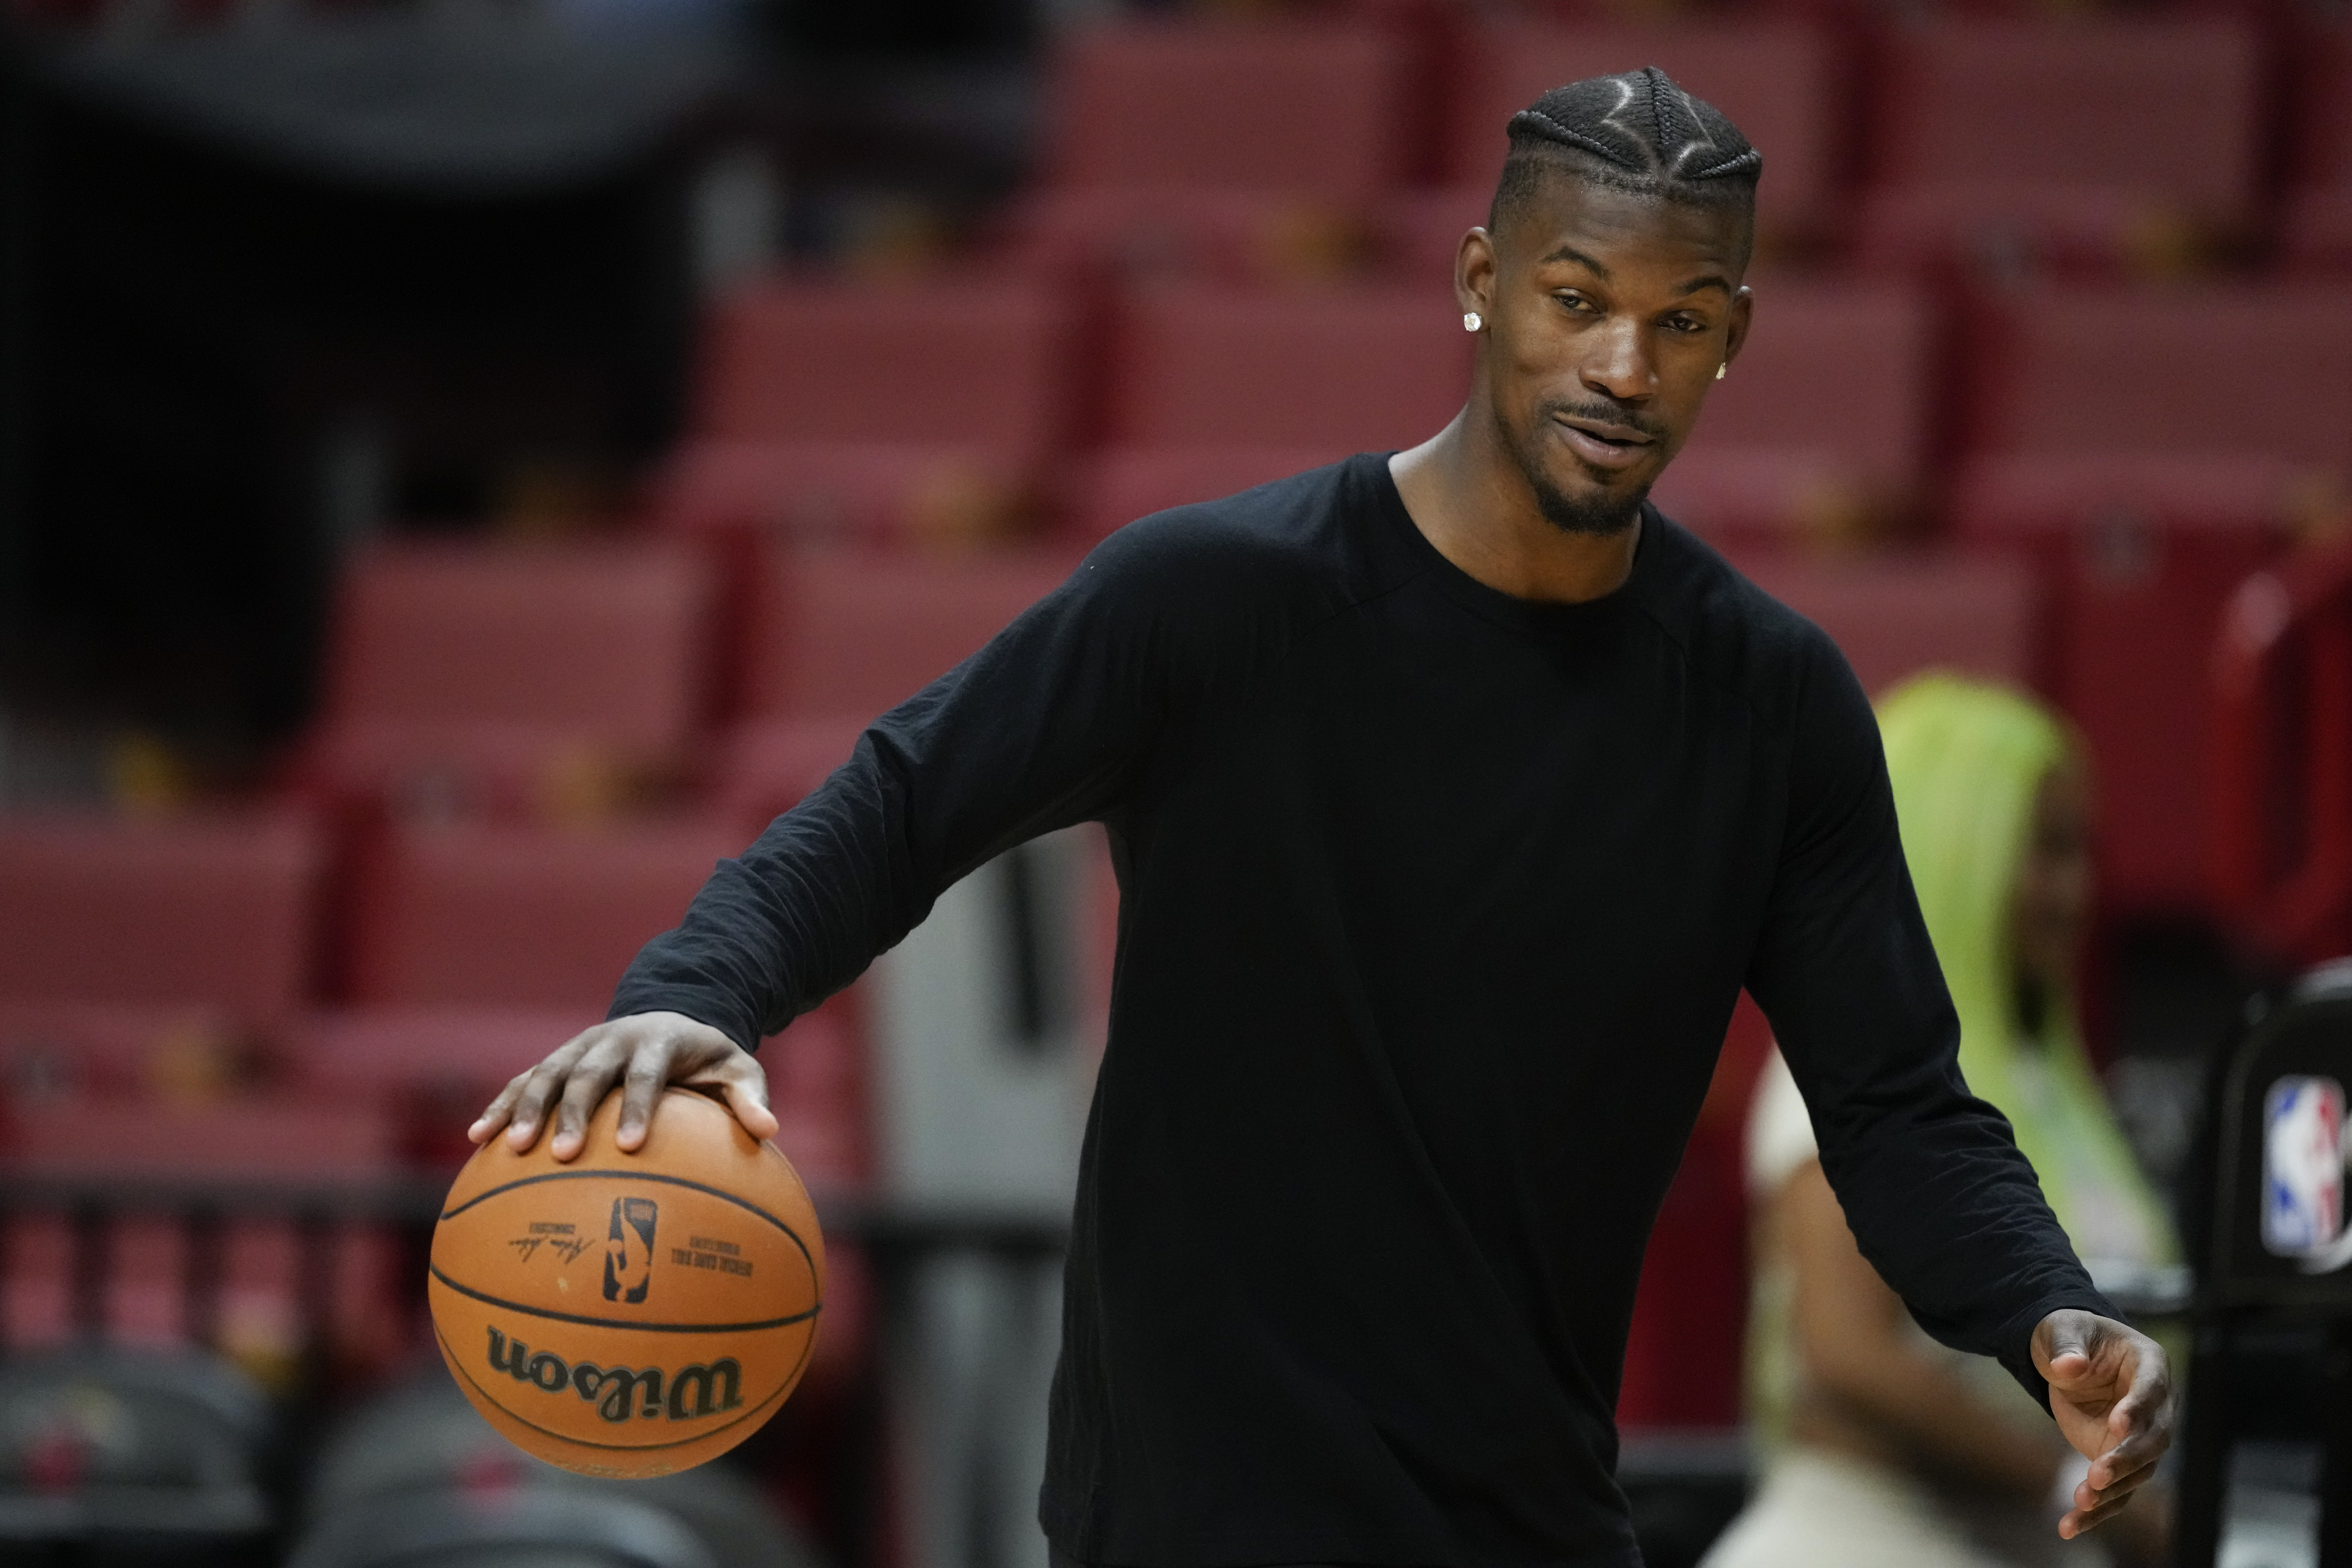 Miami's Jimmy Butler Makes Fashion Statement With Emo Hair - The